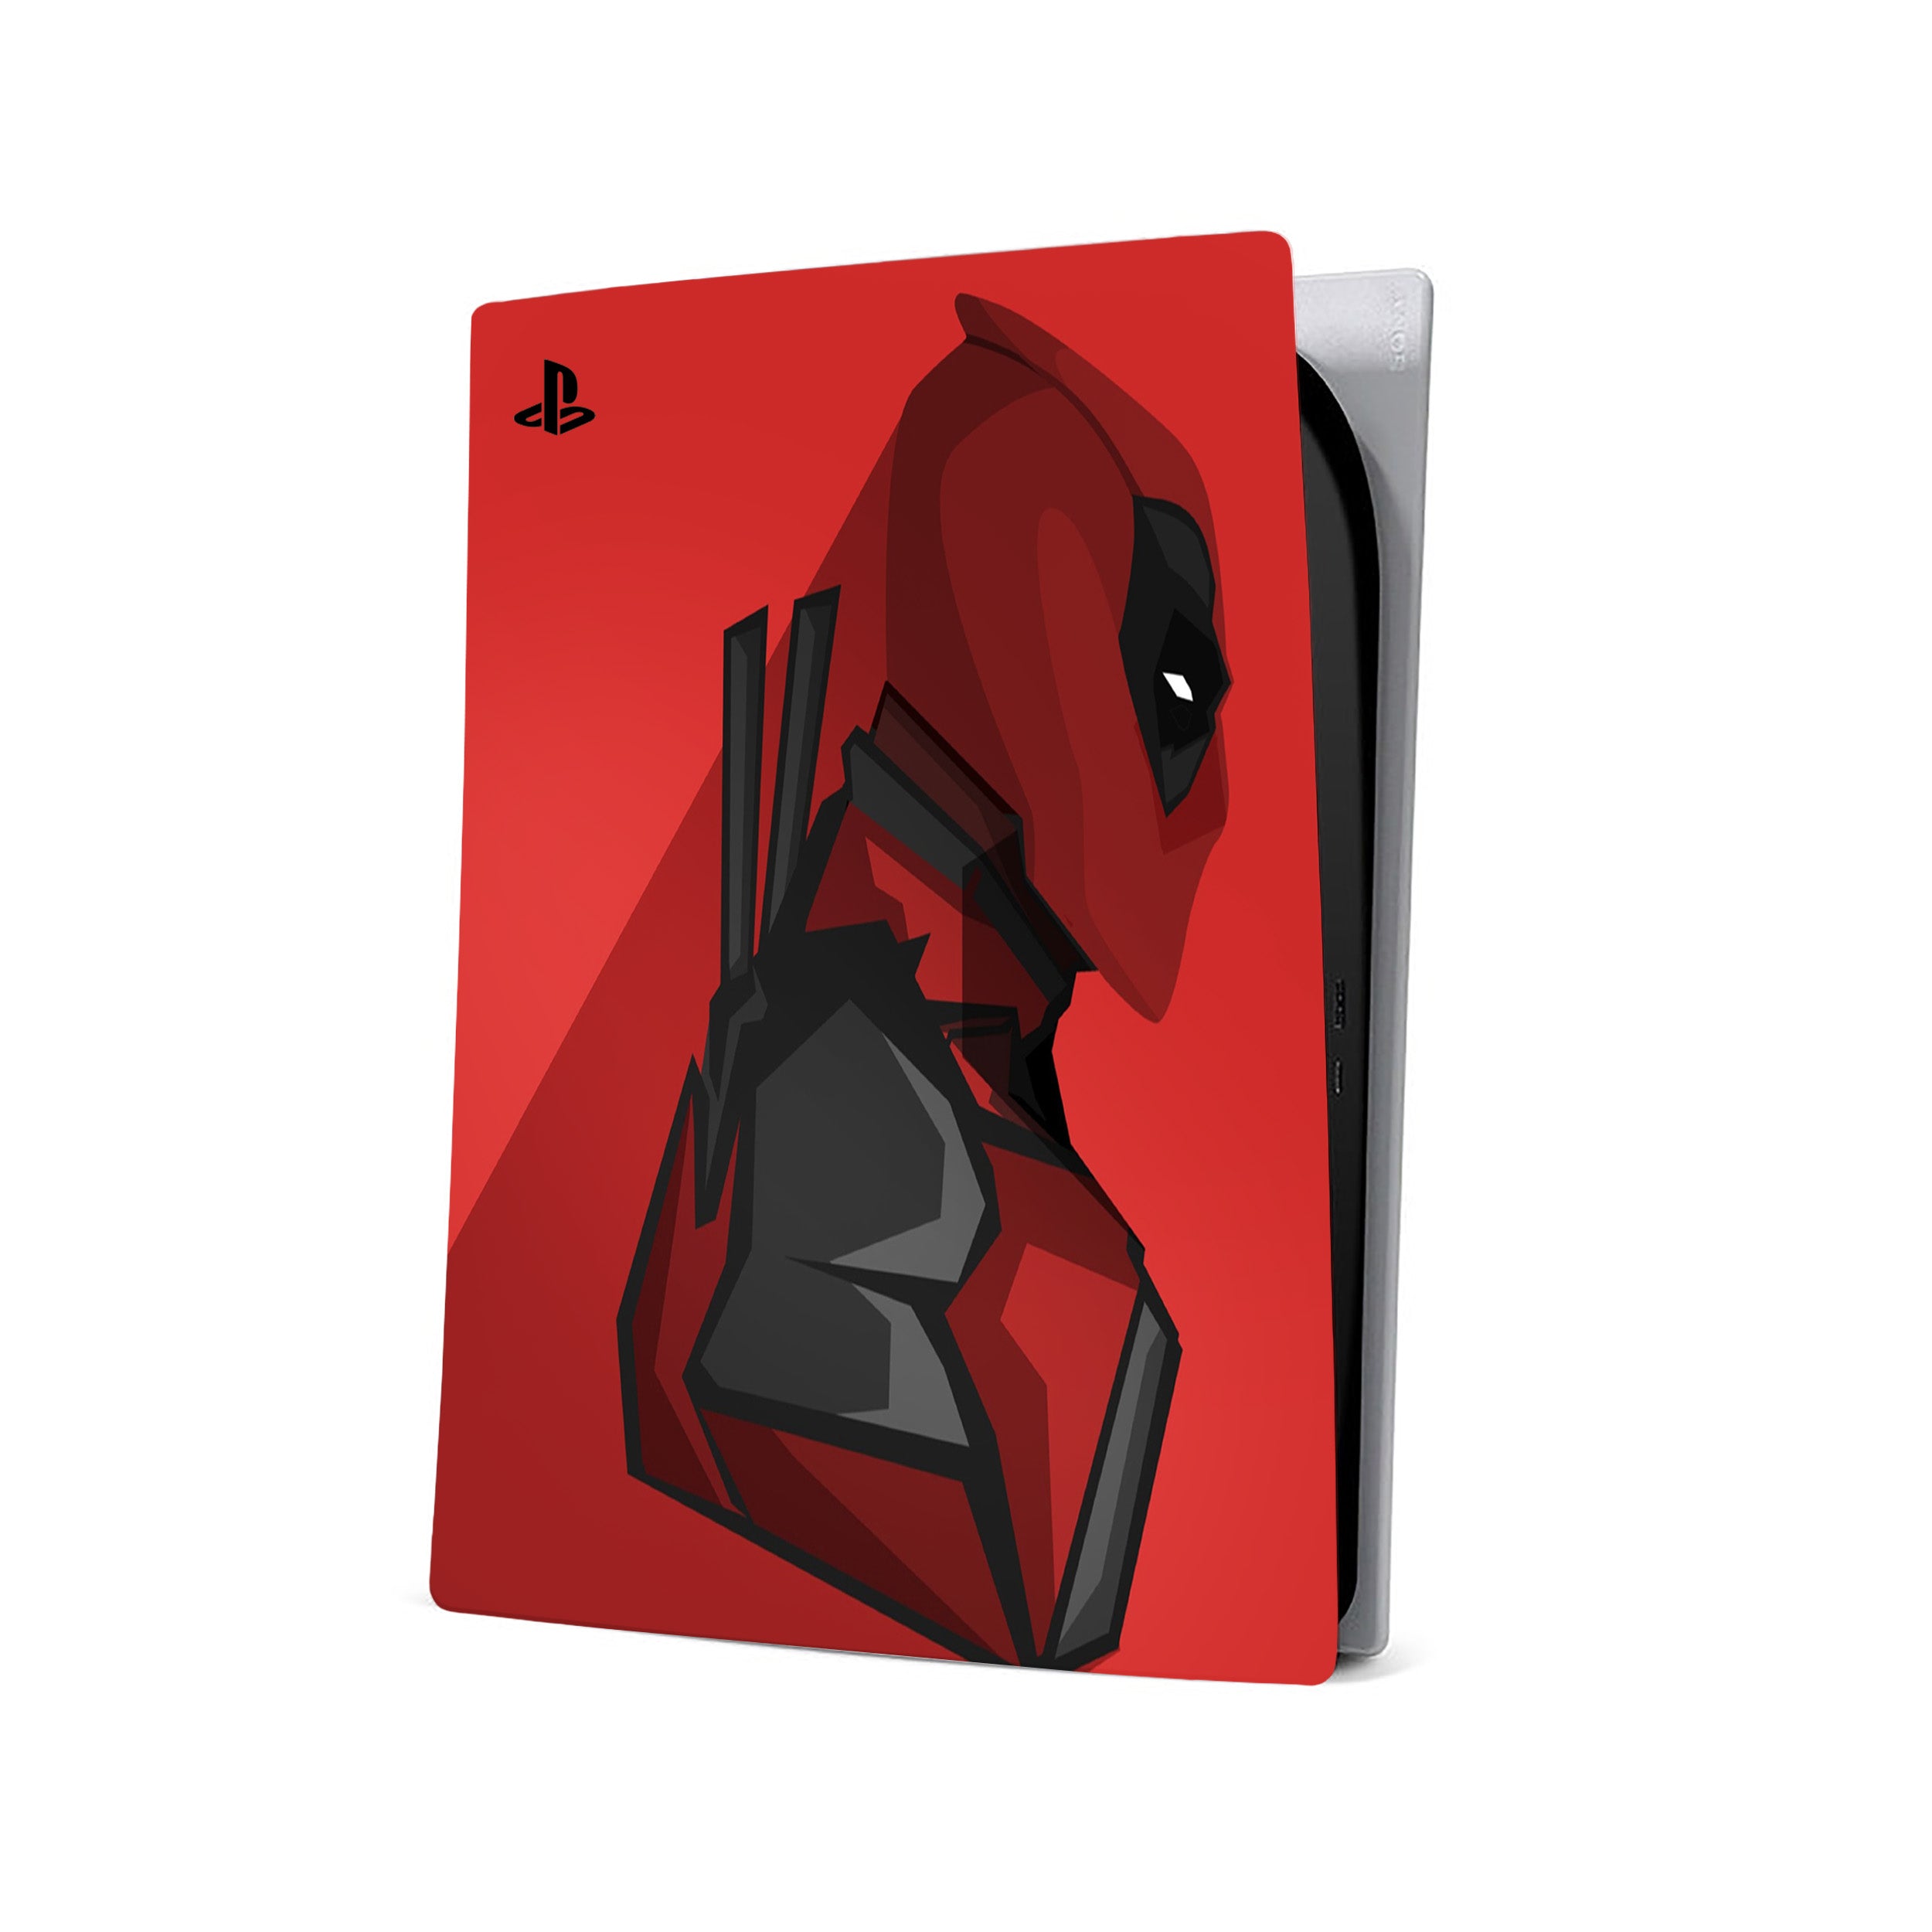 A video game skin featuring a Marvel Comics Deadpool design for the PS5.